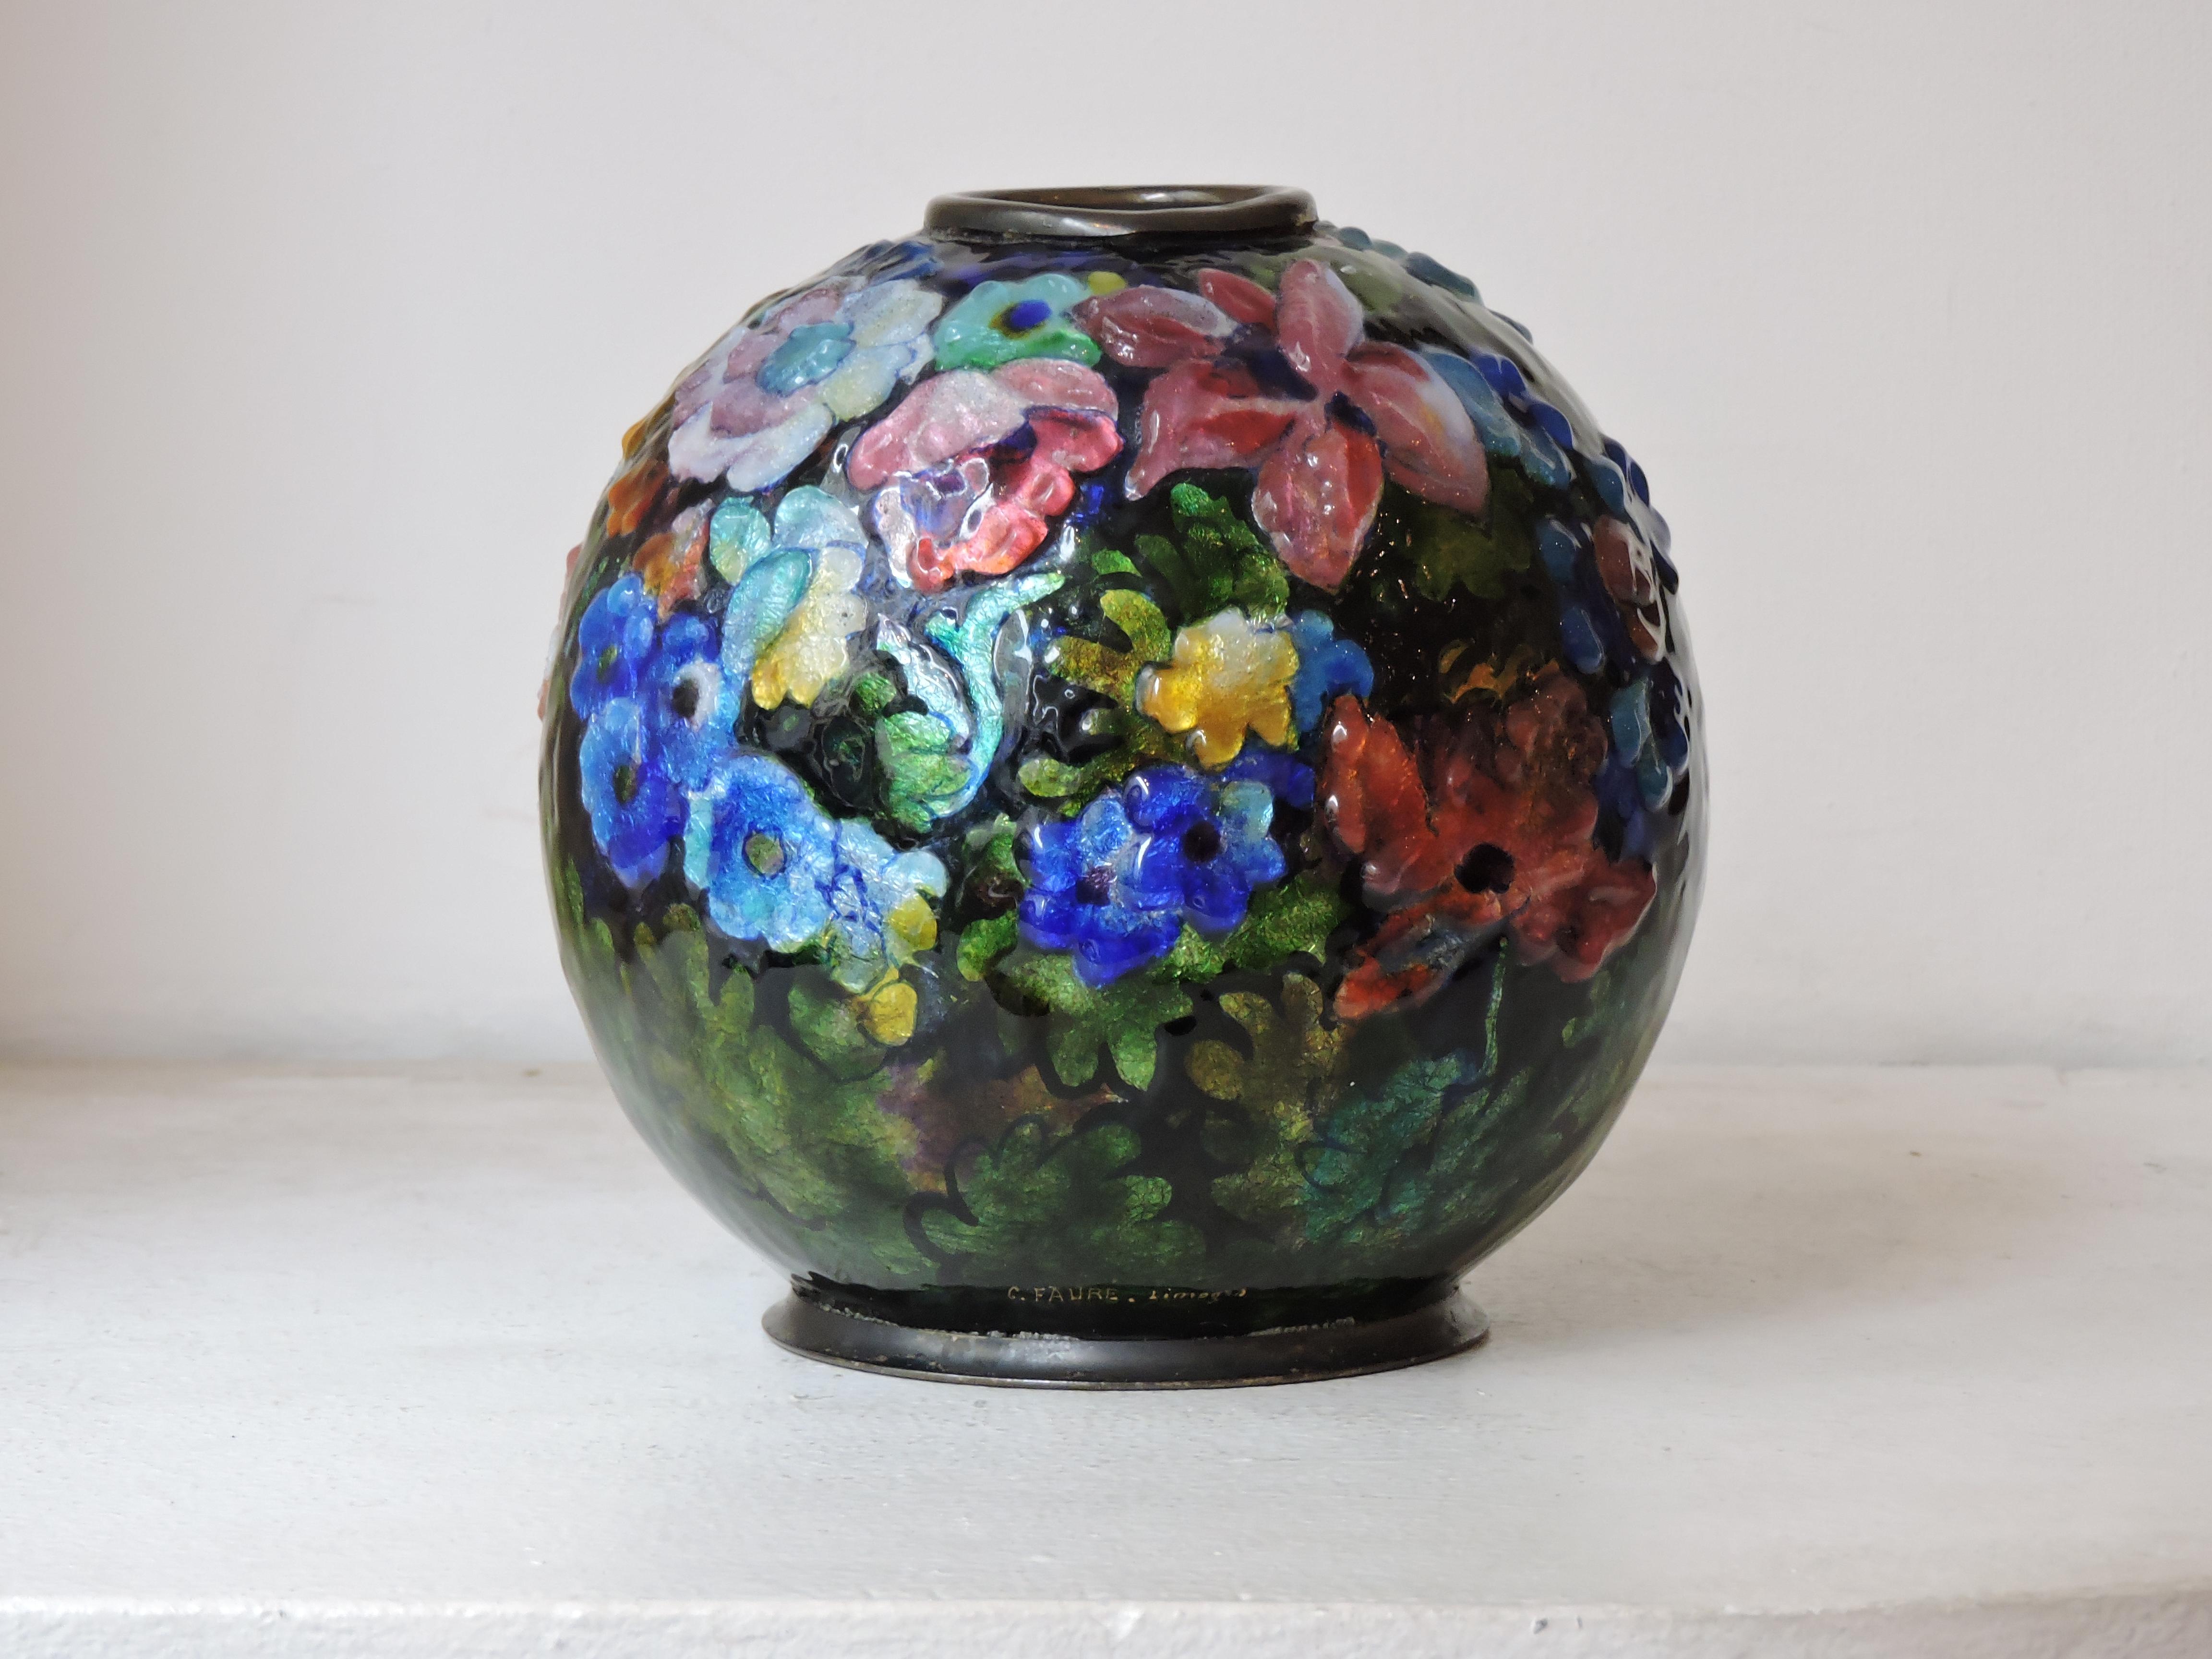 A Spherical vase by Camille Faure (1874-1956) made of hand applied polychromed enamel over a copper body depicting a beautiful flower scene in slight relief.
Brass collar and base,
circa 1930 
Signed C. Faure Limoges.

 